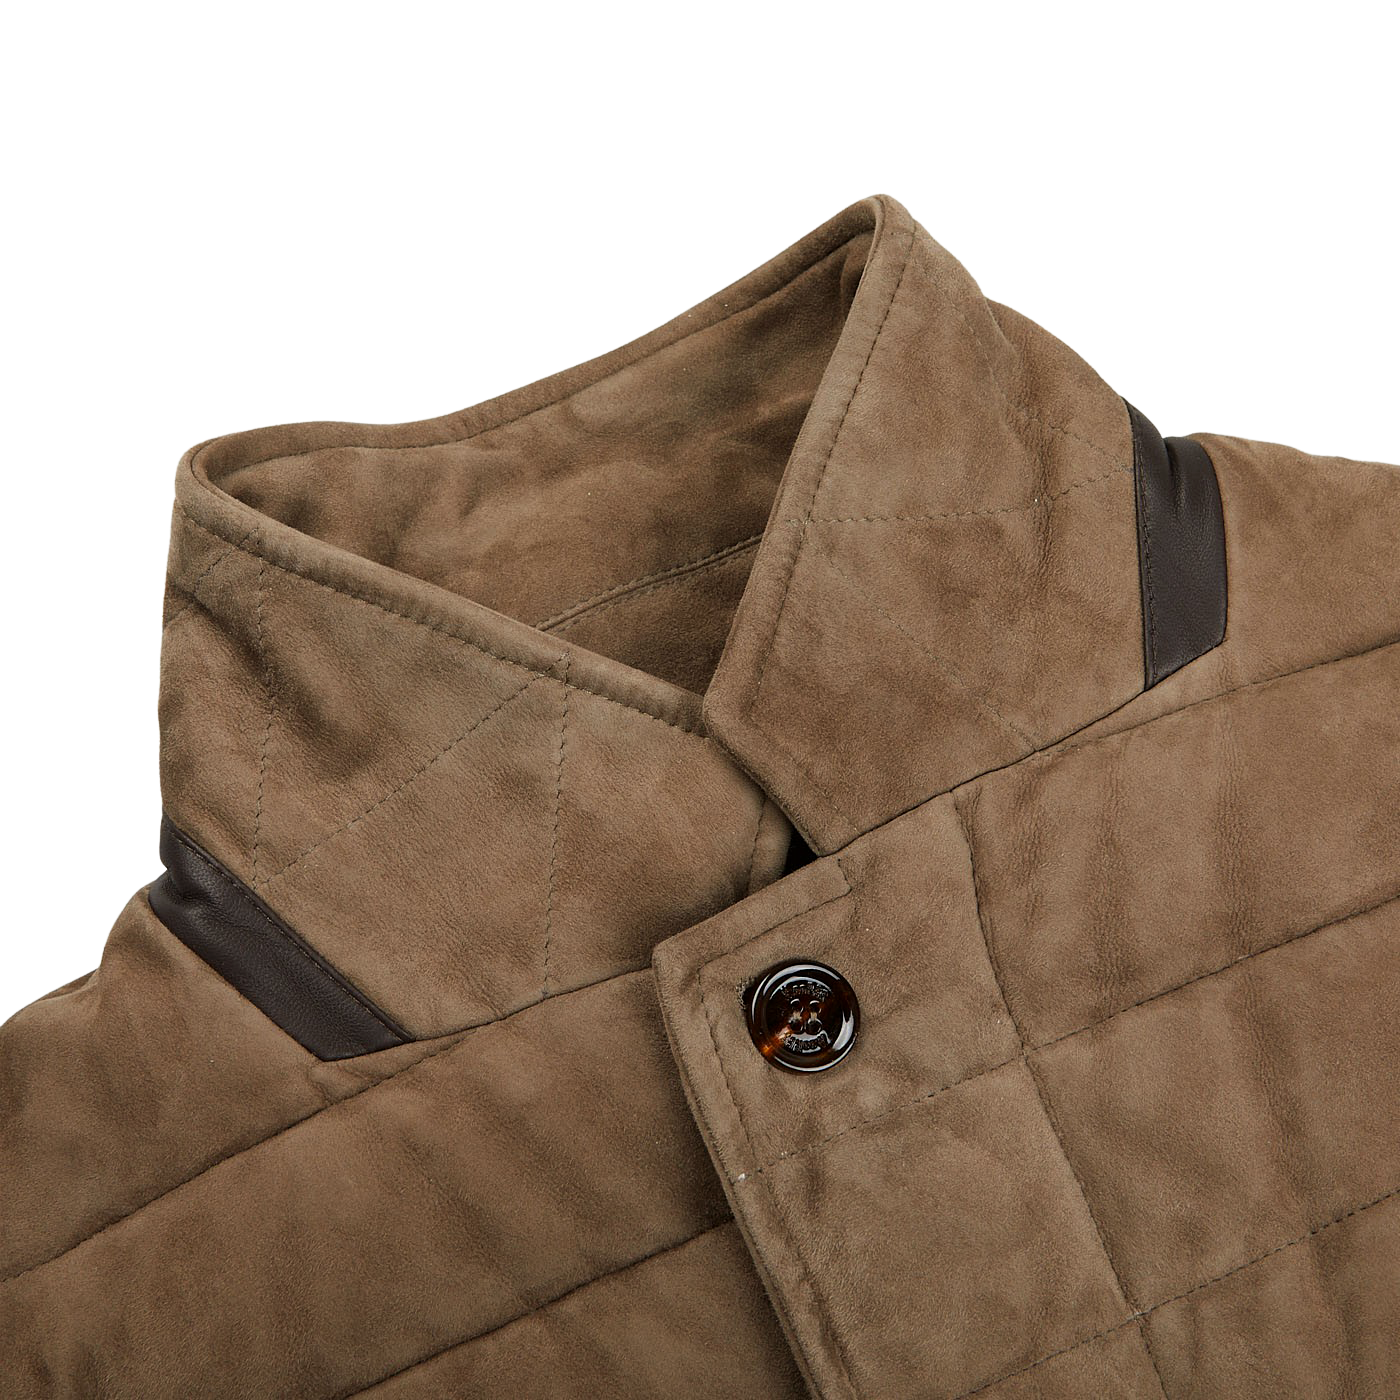 A close up of a Moorer Dark Taupe Suede Leather Down Padded Jacket showcasing exquisite craftsmanship.